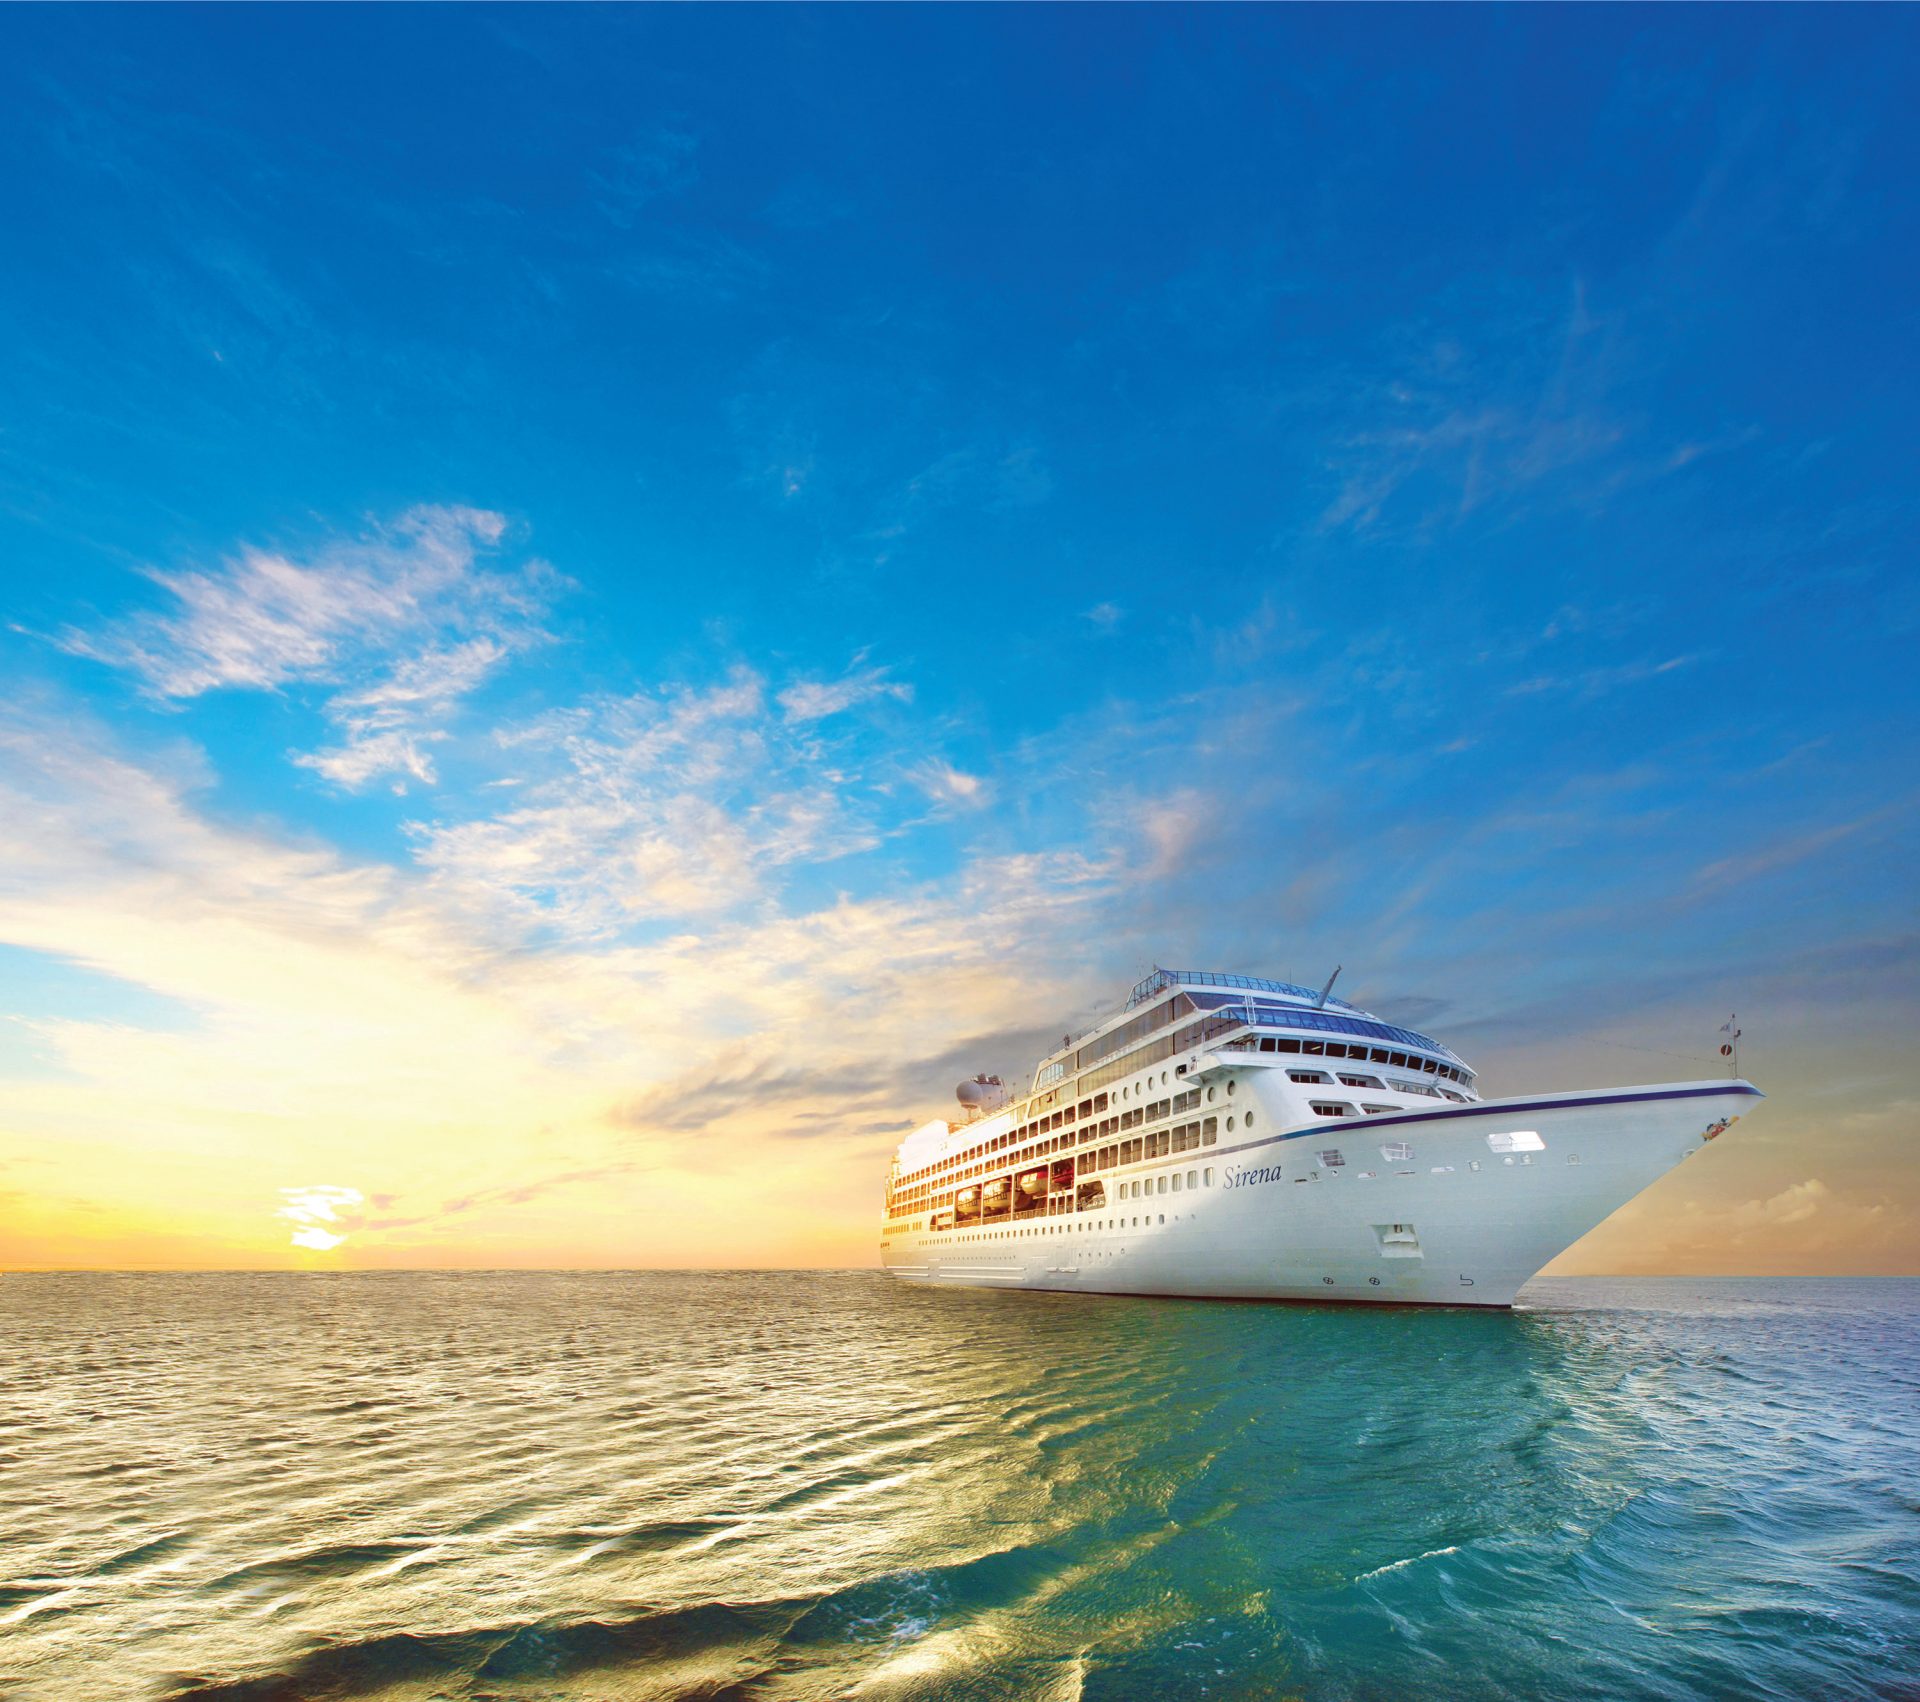 There has never been a better time to set sail with Oceania Cruises